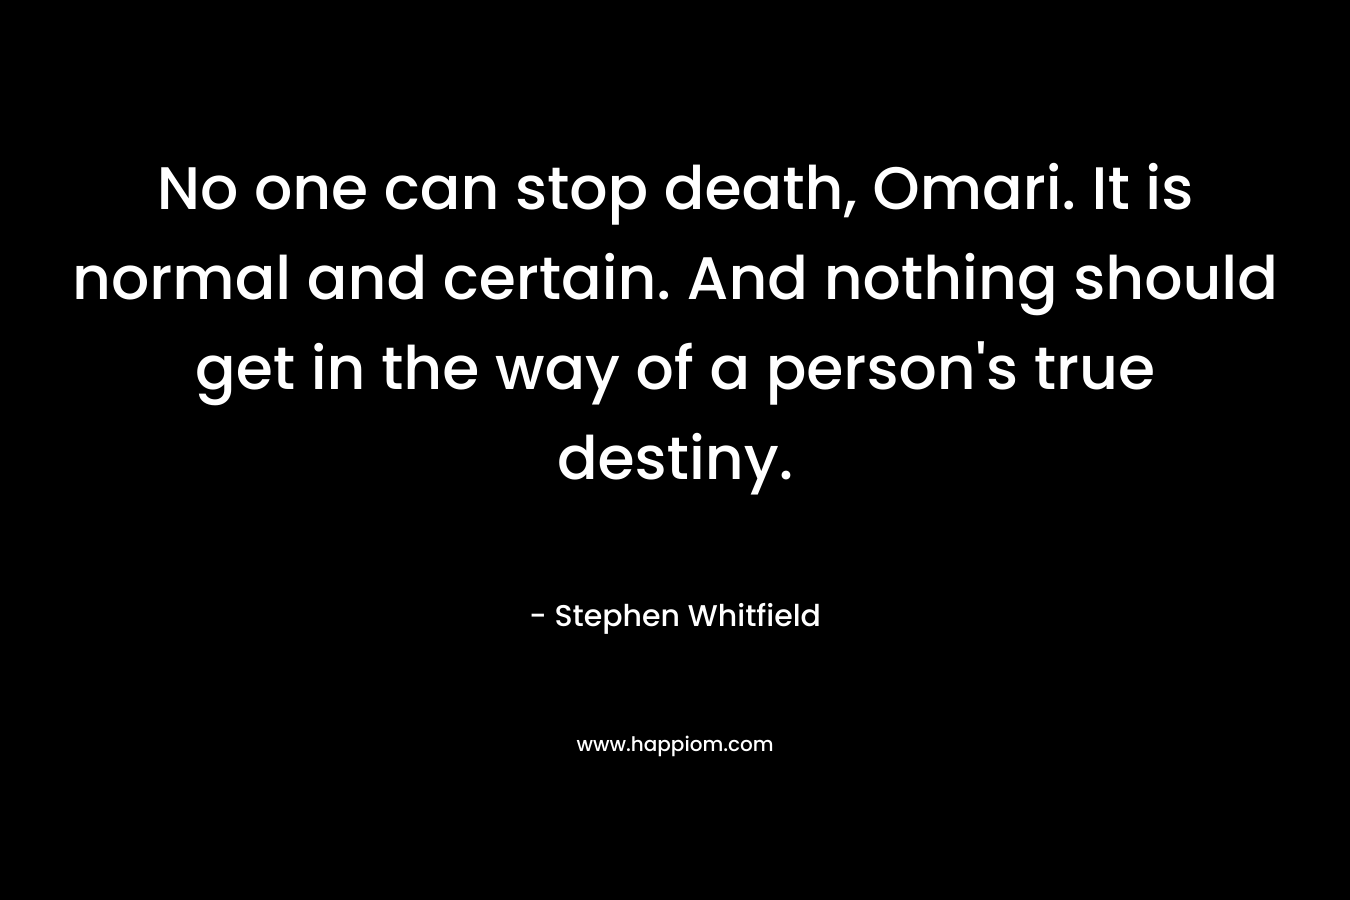 No one can stop death, Omari. It is normal and certain. And nothing should get in the way of a person’s true destiny. – Stephen Whitfield